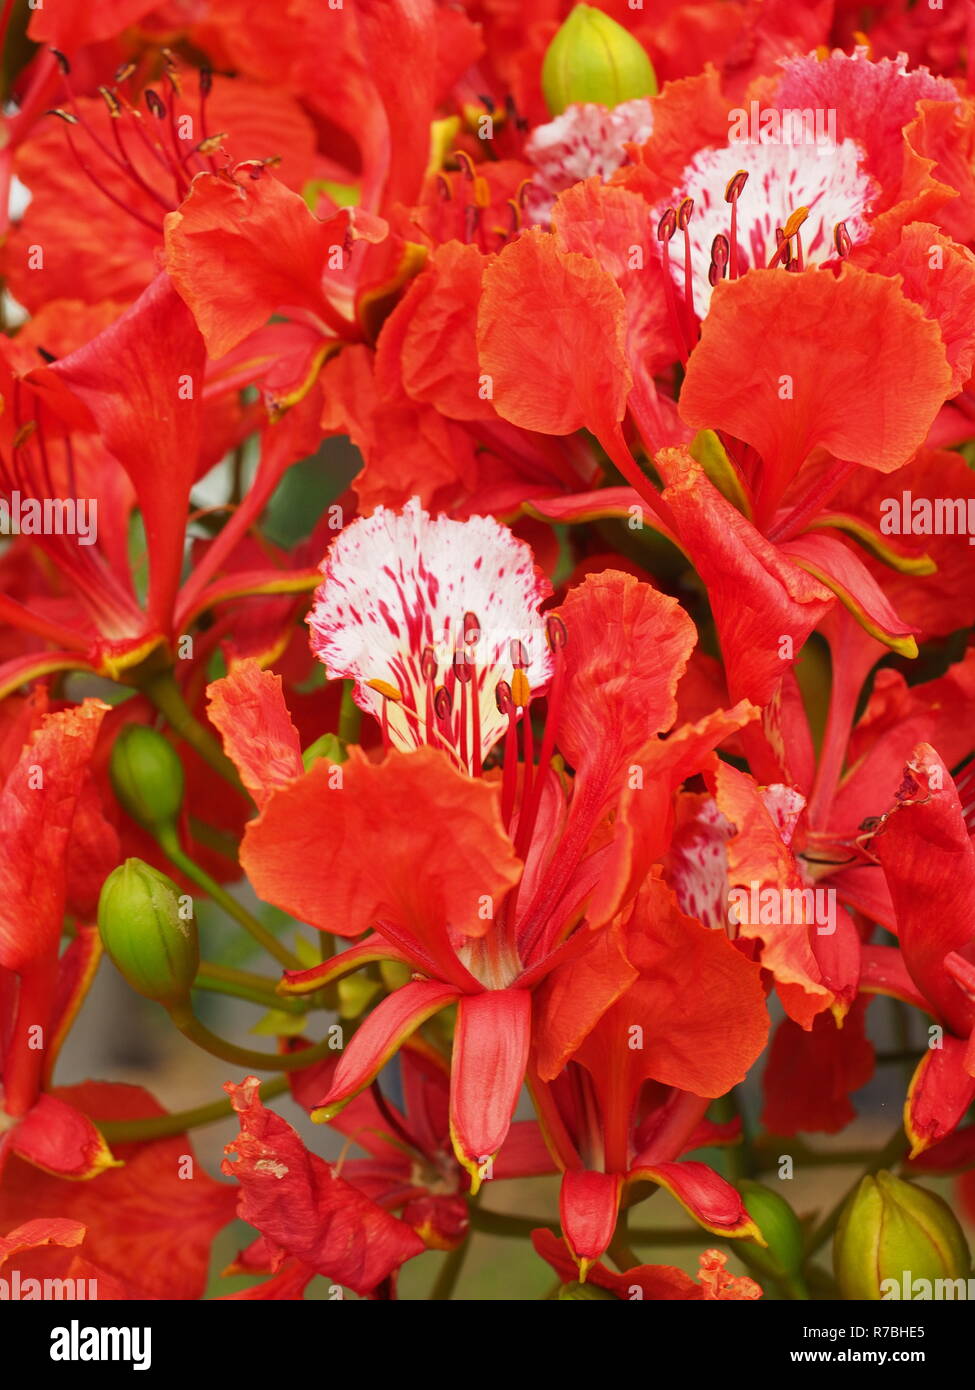 Red Poinciana flowers. A closeup image of many Poinciana flowers with red petals. Stock Photo